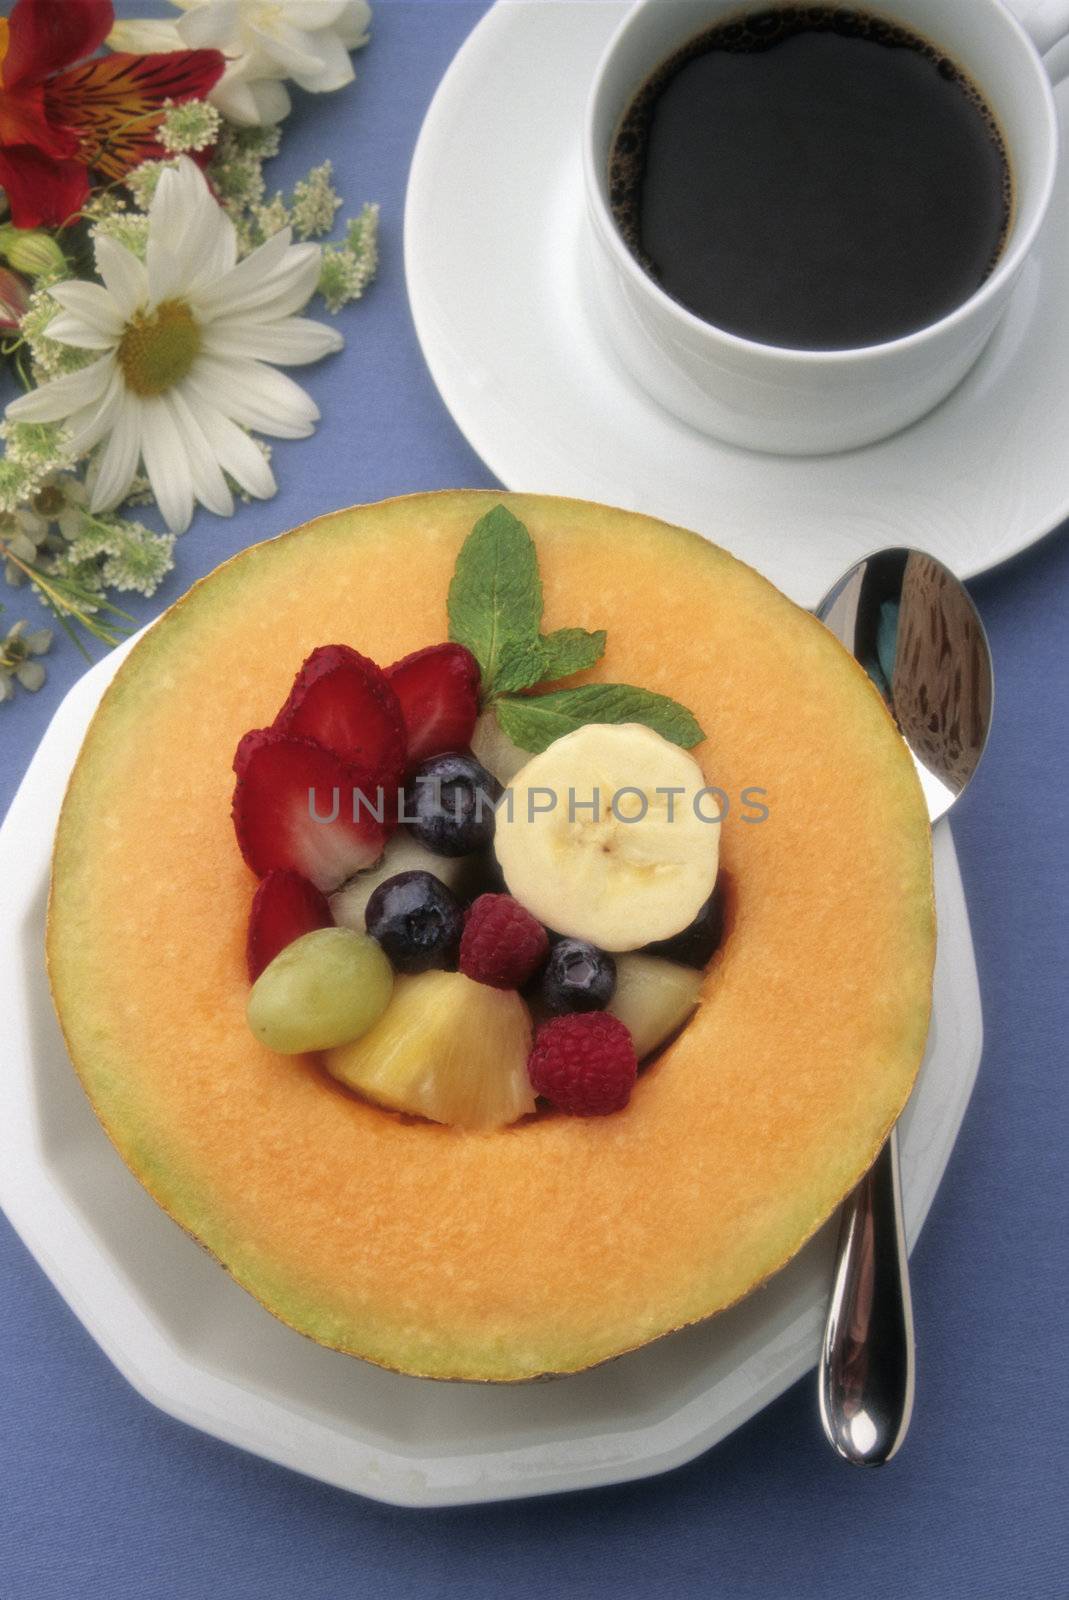 Healthy breakfast melon with fruit, coffee and juice by edbockstock